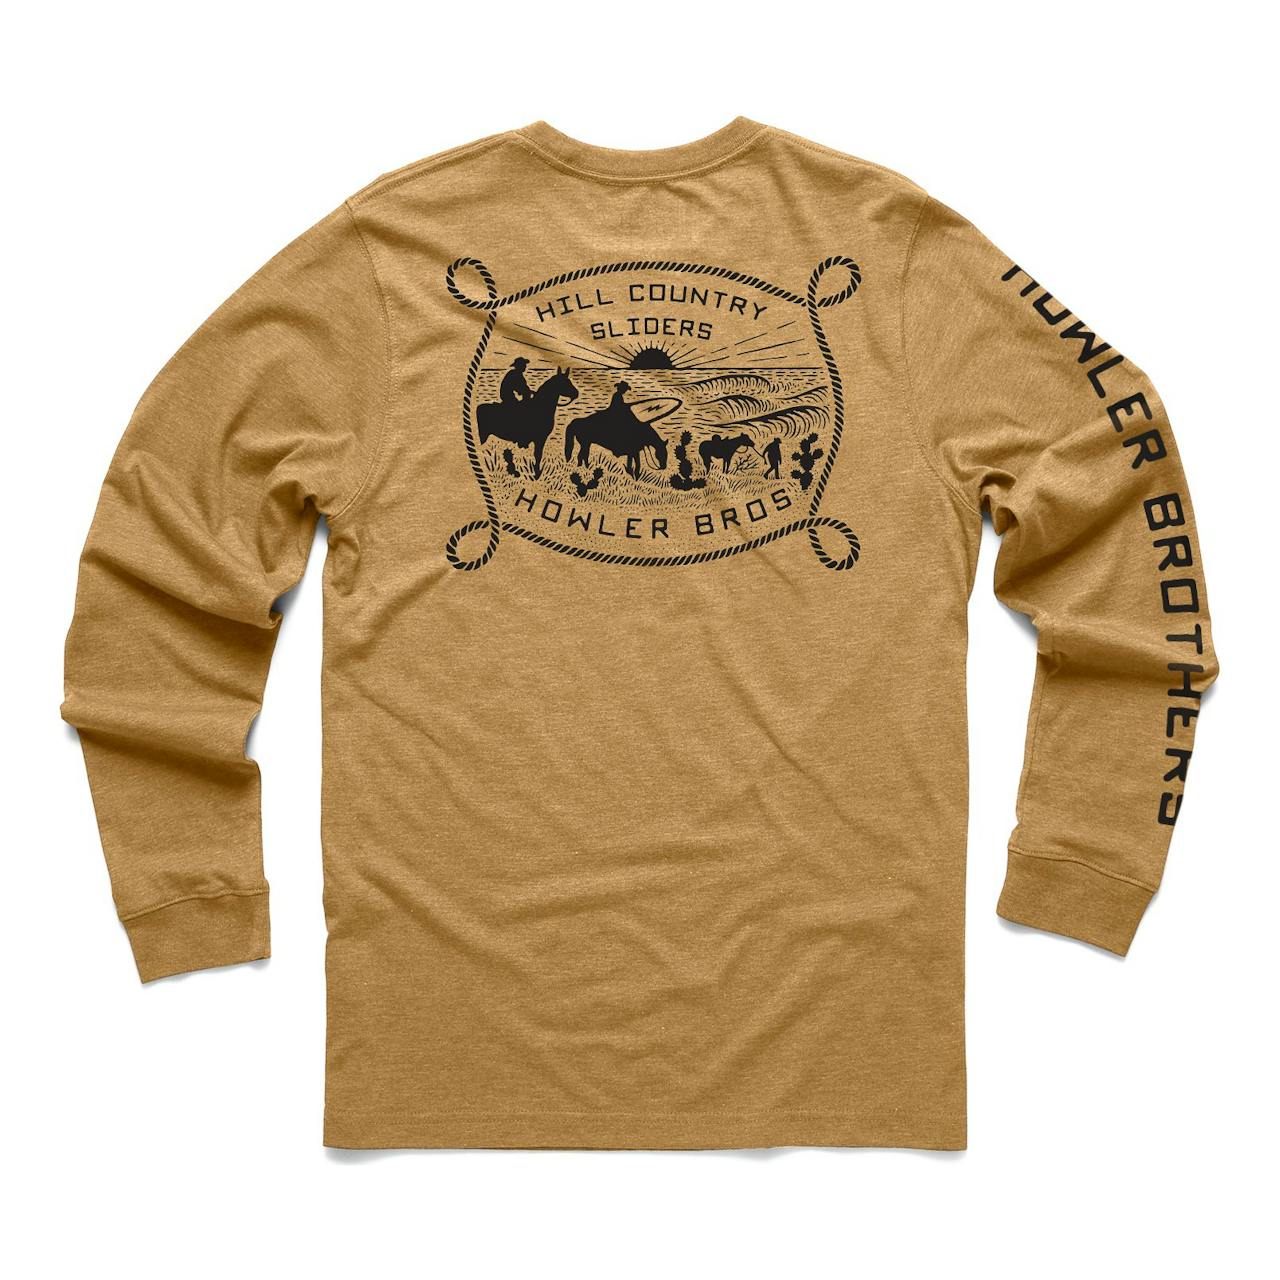 Howler Brothers Hill Country Sliders Long Sleeve Tee